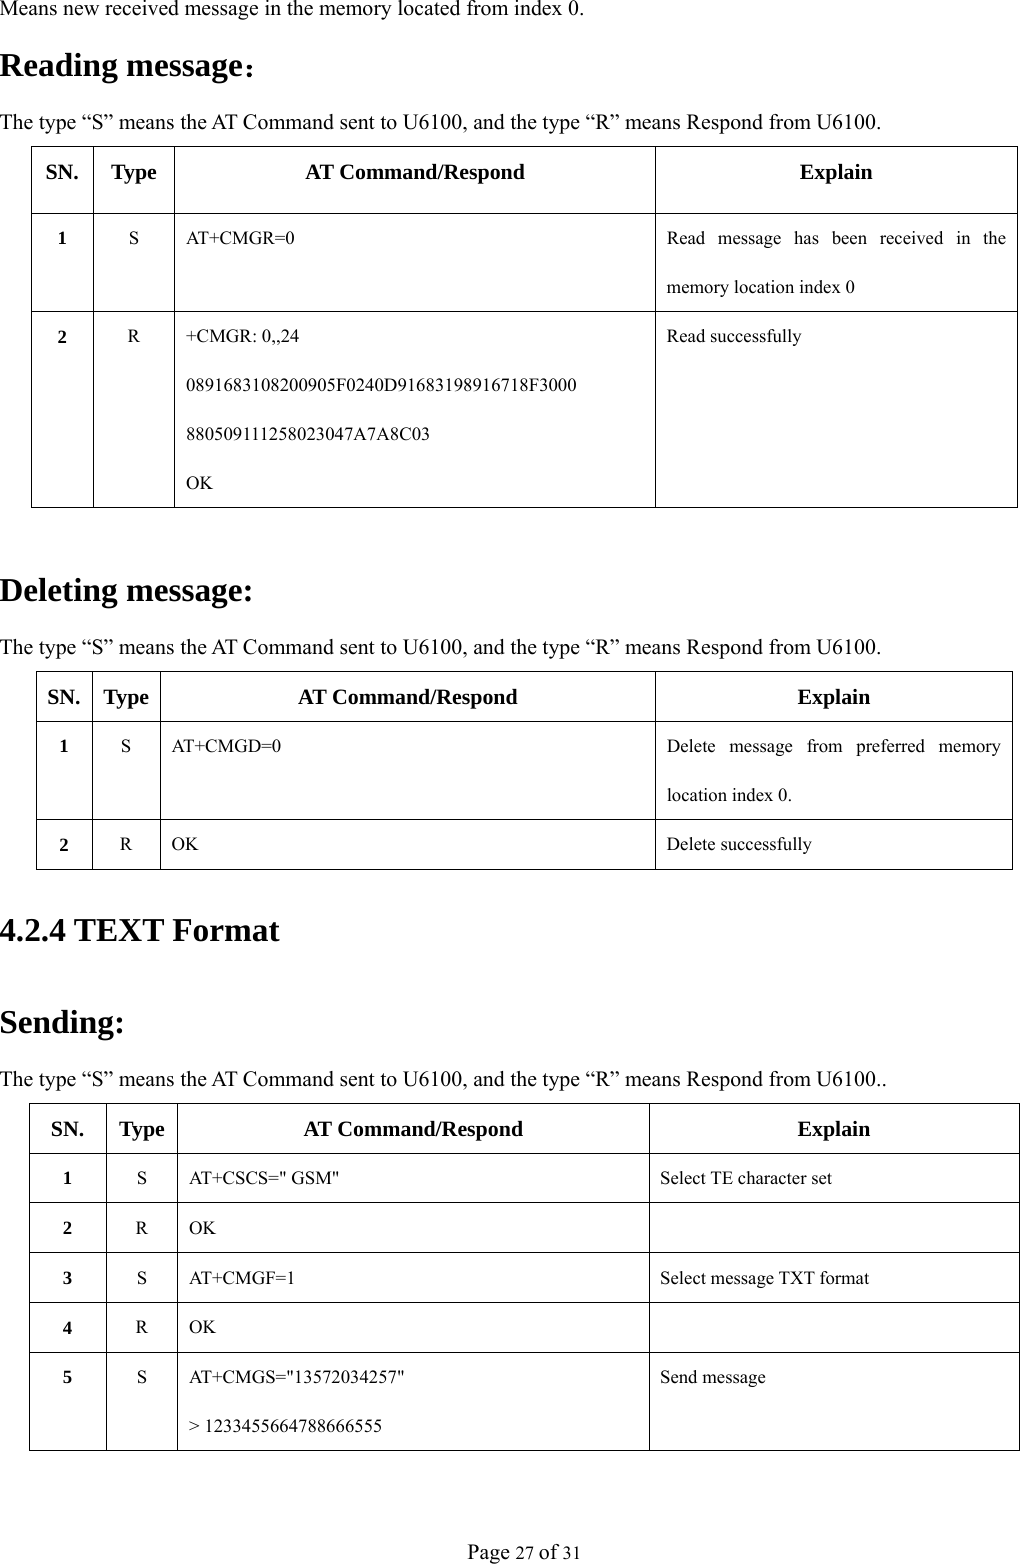 Page 27 of 31 Means new received message in the memory located from index 0. Reading message： The type “S” means the AT Command sent to U6100, and the type “R” means Respond from U6100. SN. Type  AT Command/Respond  Explain 1  S  AT+CMGR=0  Read message has been received in the memory location index 0 2  R +CMGR: 0,,24 0891683108200905F0240D91683198916718F3000 880509111258023047A7A8C03 OK Read successfully  Deleting message: The type “S” means the AT Command sent to U6100, and the type “R” means Respond from U6100. SN. Type  AT Command/Respond  Explain 1  S  AT+CMGD=0  Delete message from preferred memory location index 0. 2  R OK  Delete successfully 4.2.4 TEXT Format Sending: The type “S” means the AT Command sent to U6100, and the type “R” means Respond from U6100.. SN. Type  AT Command/Respond  Explain 1  S  AT+CSCS=&quot; GSM&quot;  Select TE character set 2  R OK   3  S  AT+CMGF=1  Select message TXT format 4  R OK   5  S AT+CMGS=&quot;13572034257&quot; &gt; 1233455664788666555 Send message 